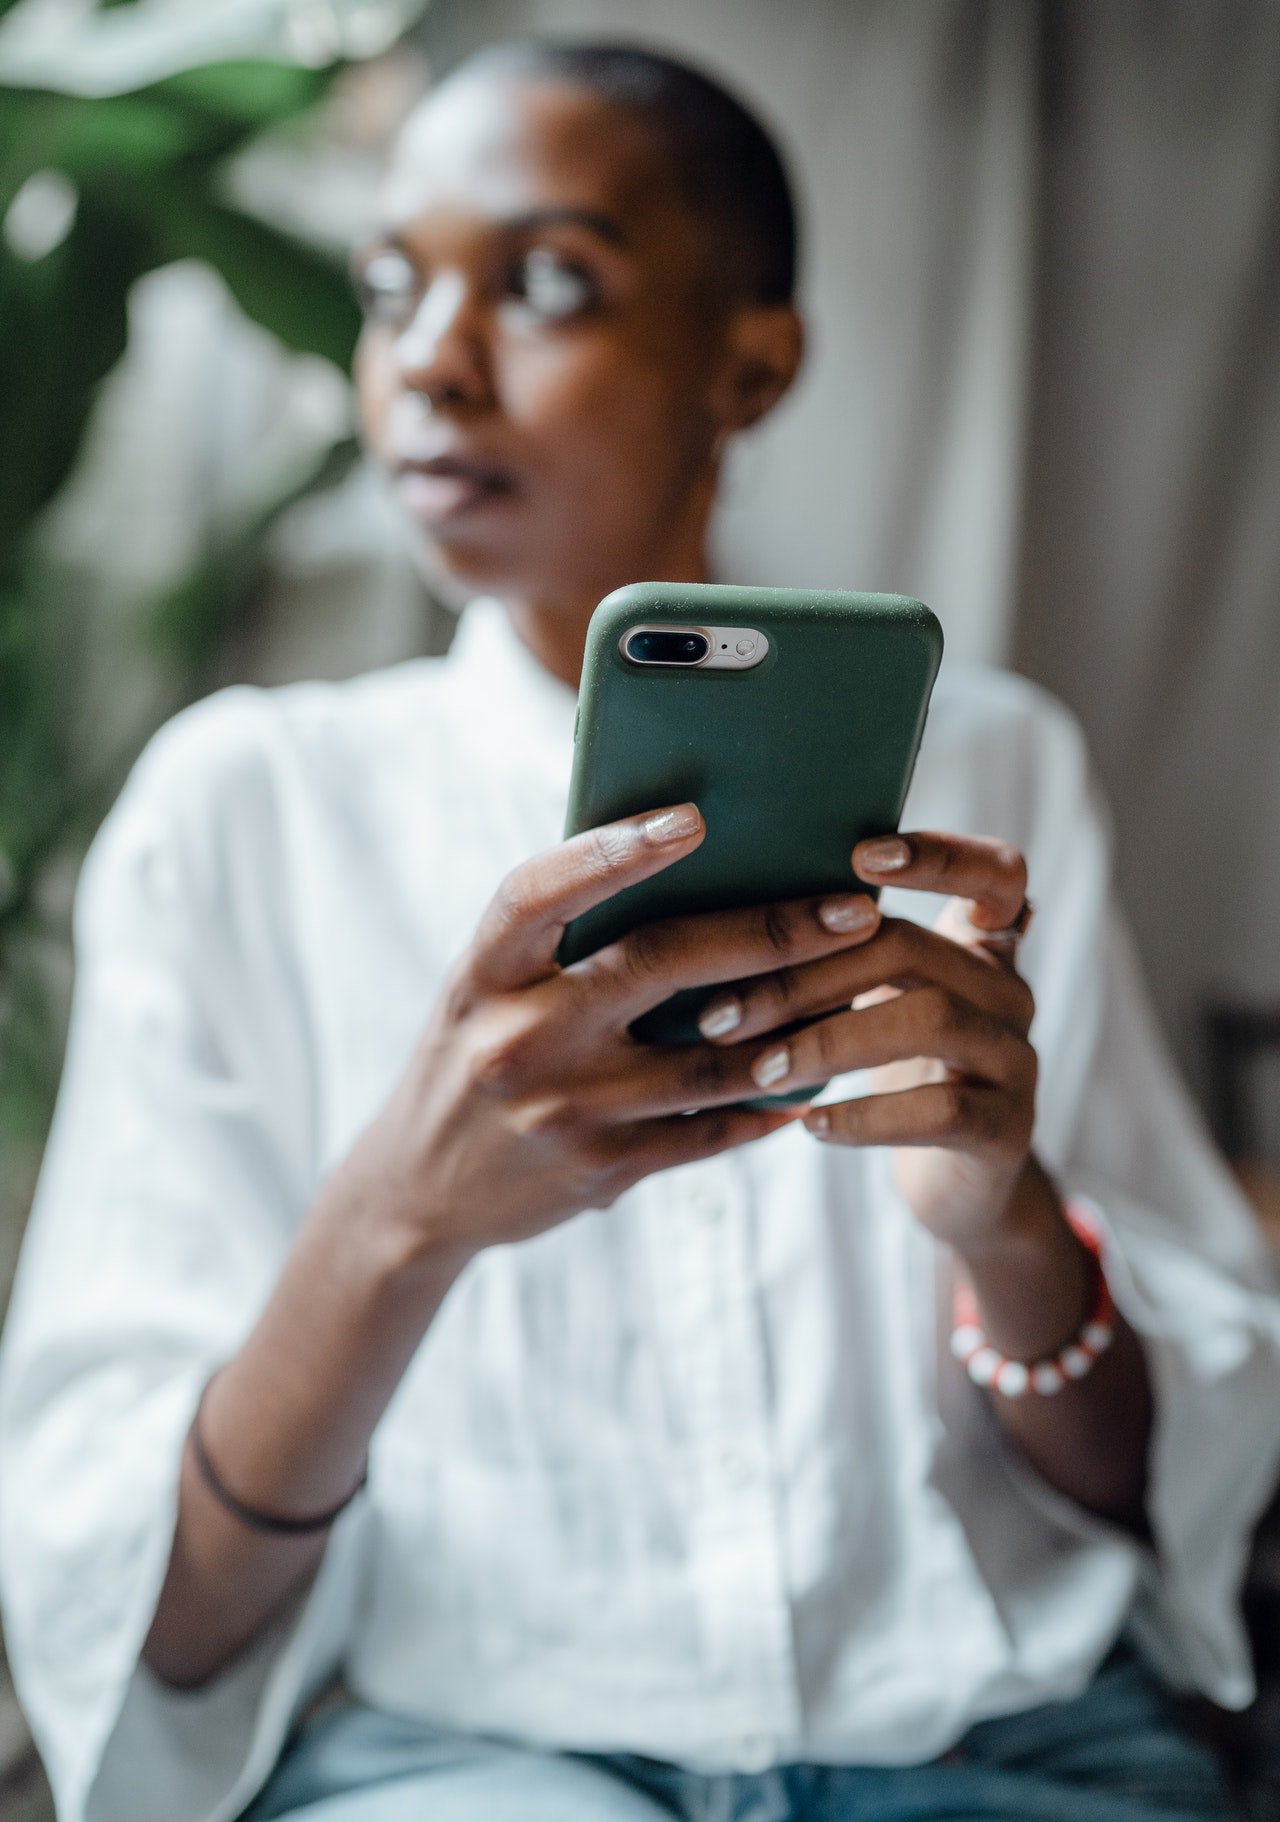 Woman using her phone and looking away | Source: Pexels